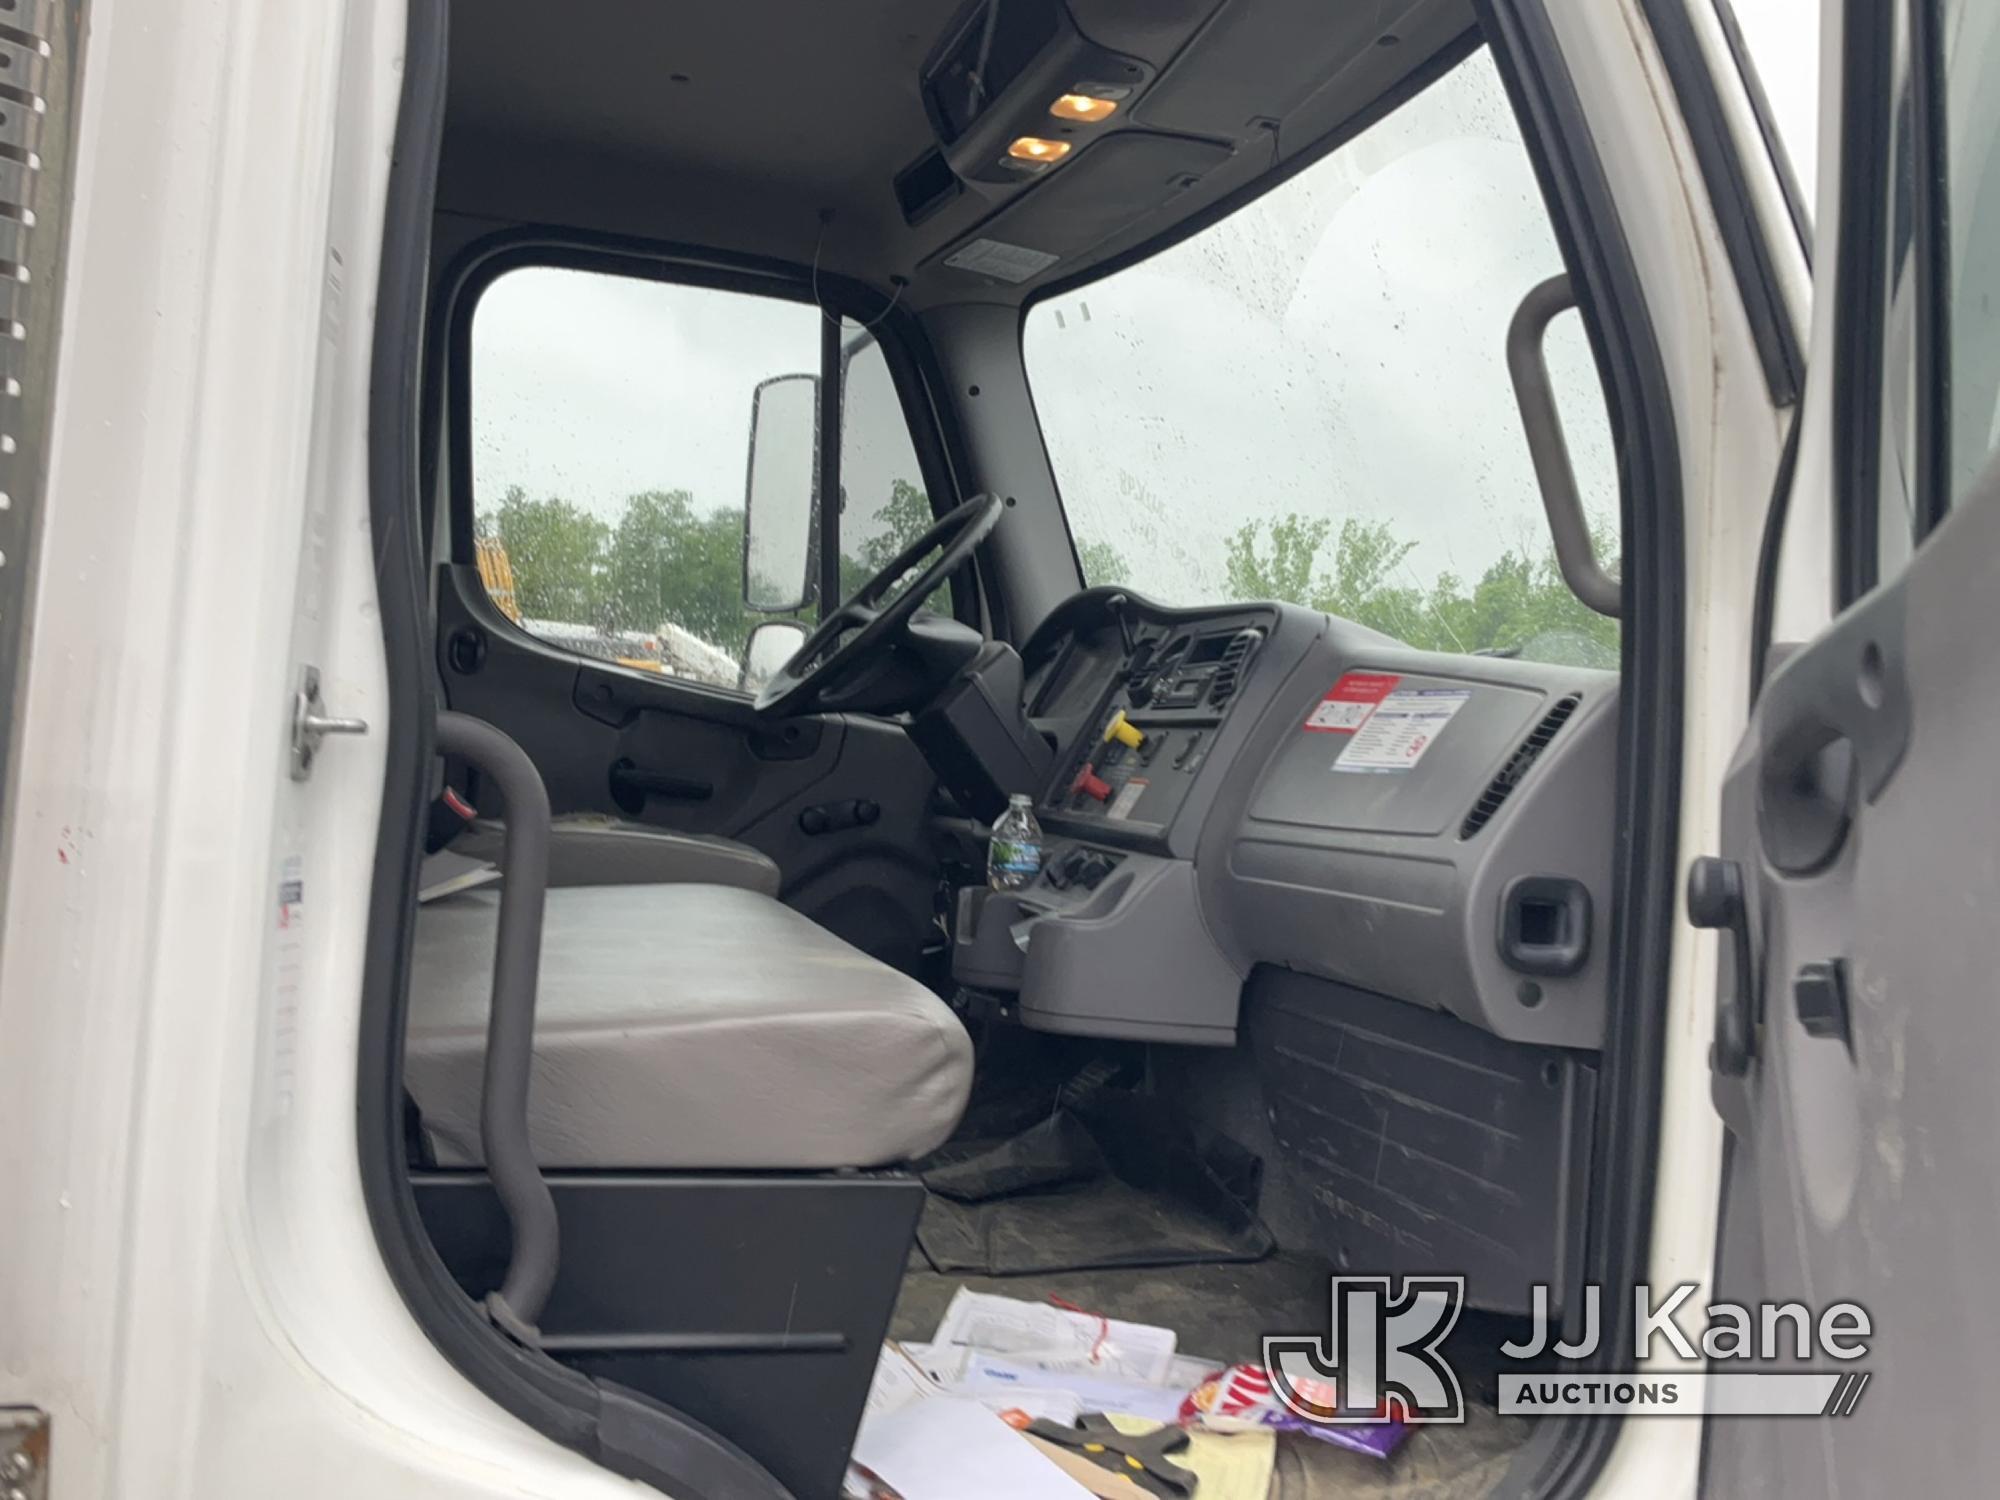 (Verona, KY) Altec DC47TR, Digger Derrick rear mounted on 2017 Freightliner M2 106 4x4 Utility Truck